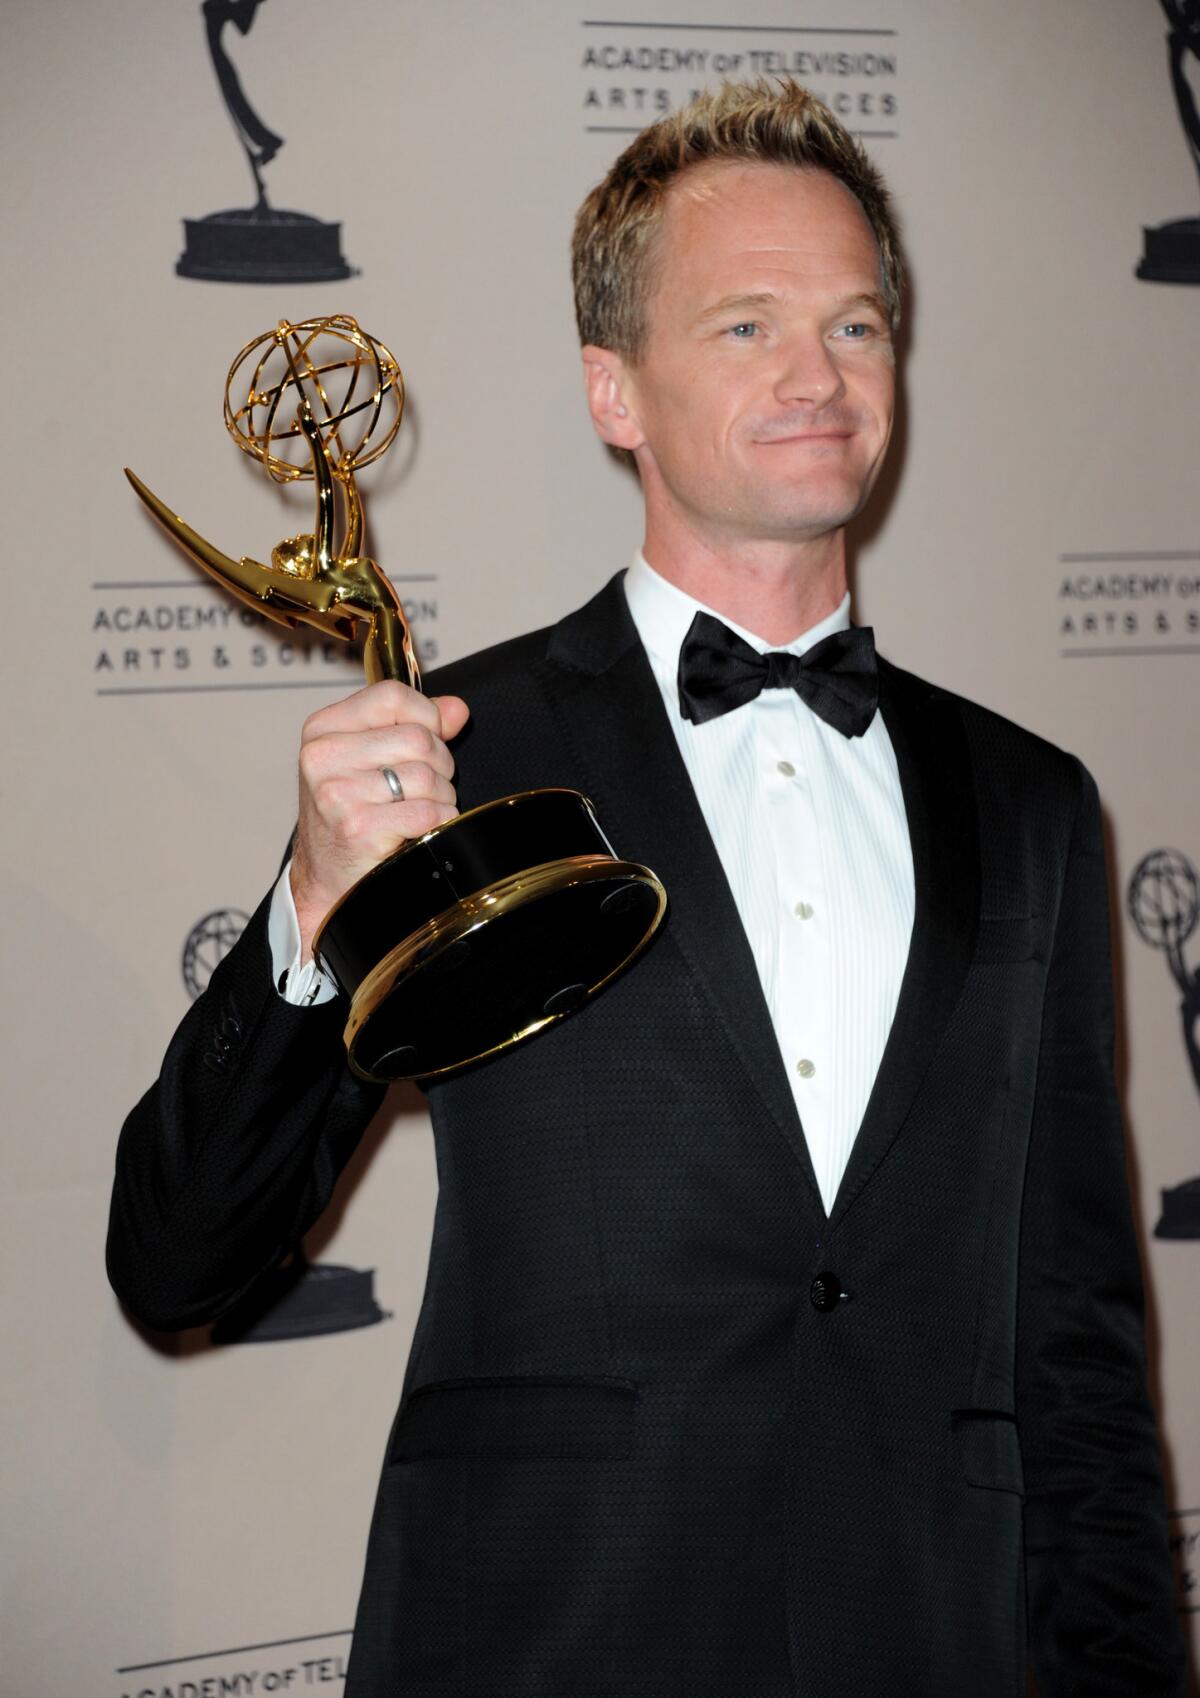 Neil Patrick Harris won an Emmy for his role as producer/host of the Tony Awards.